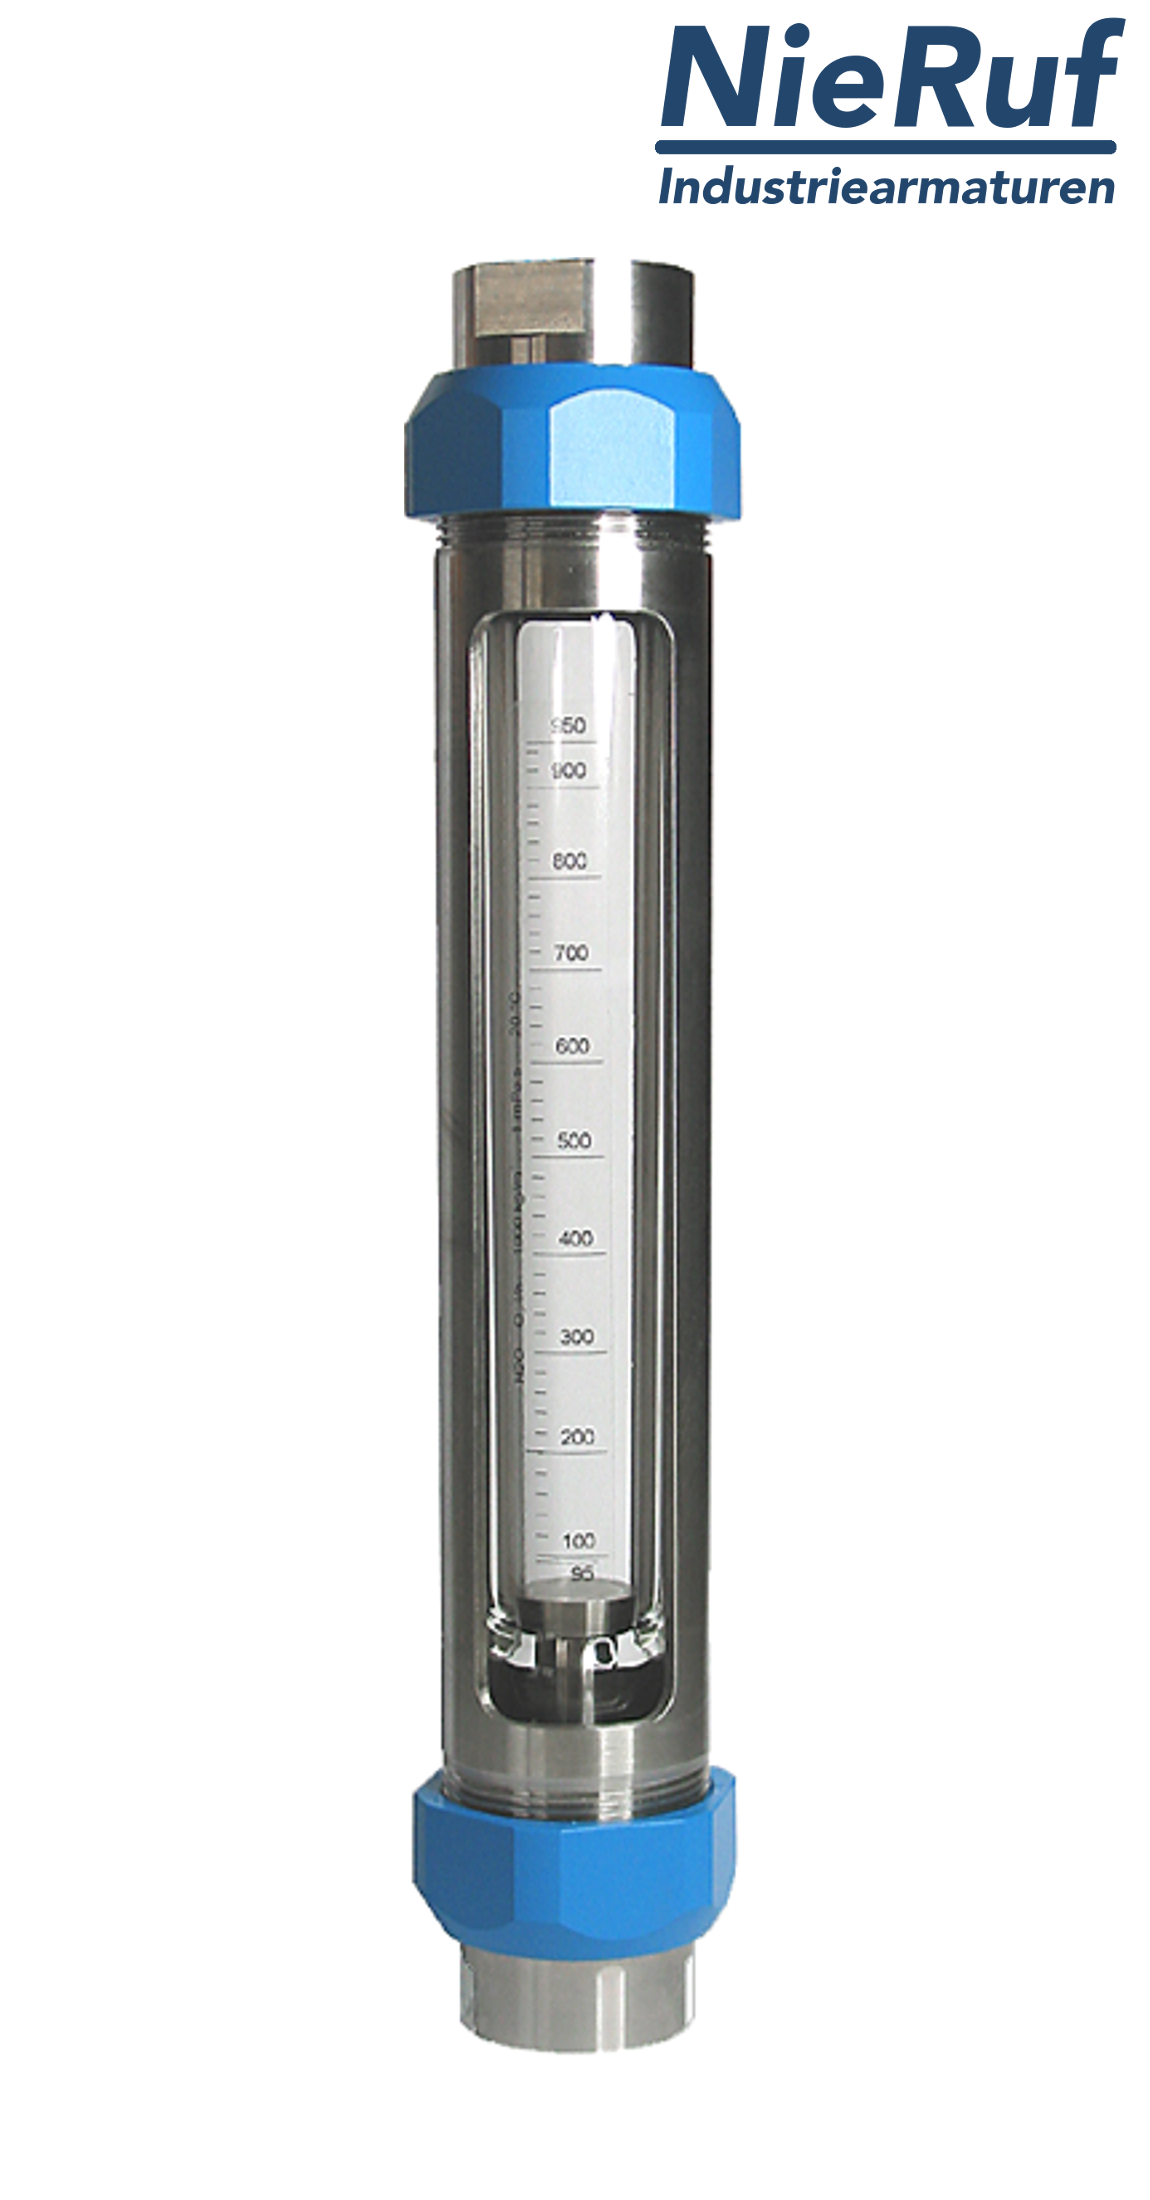 Variable area flowmeter stainless steel + borosilicate 2" inch 500.0 - 5000 l/h water FKM